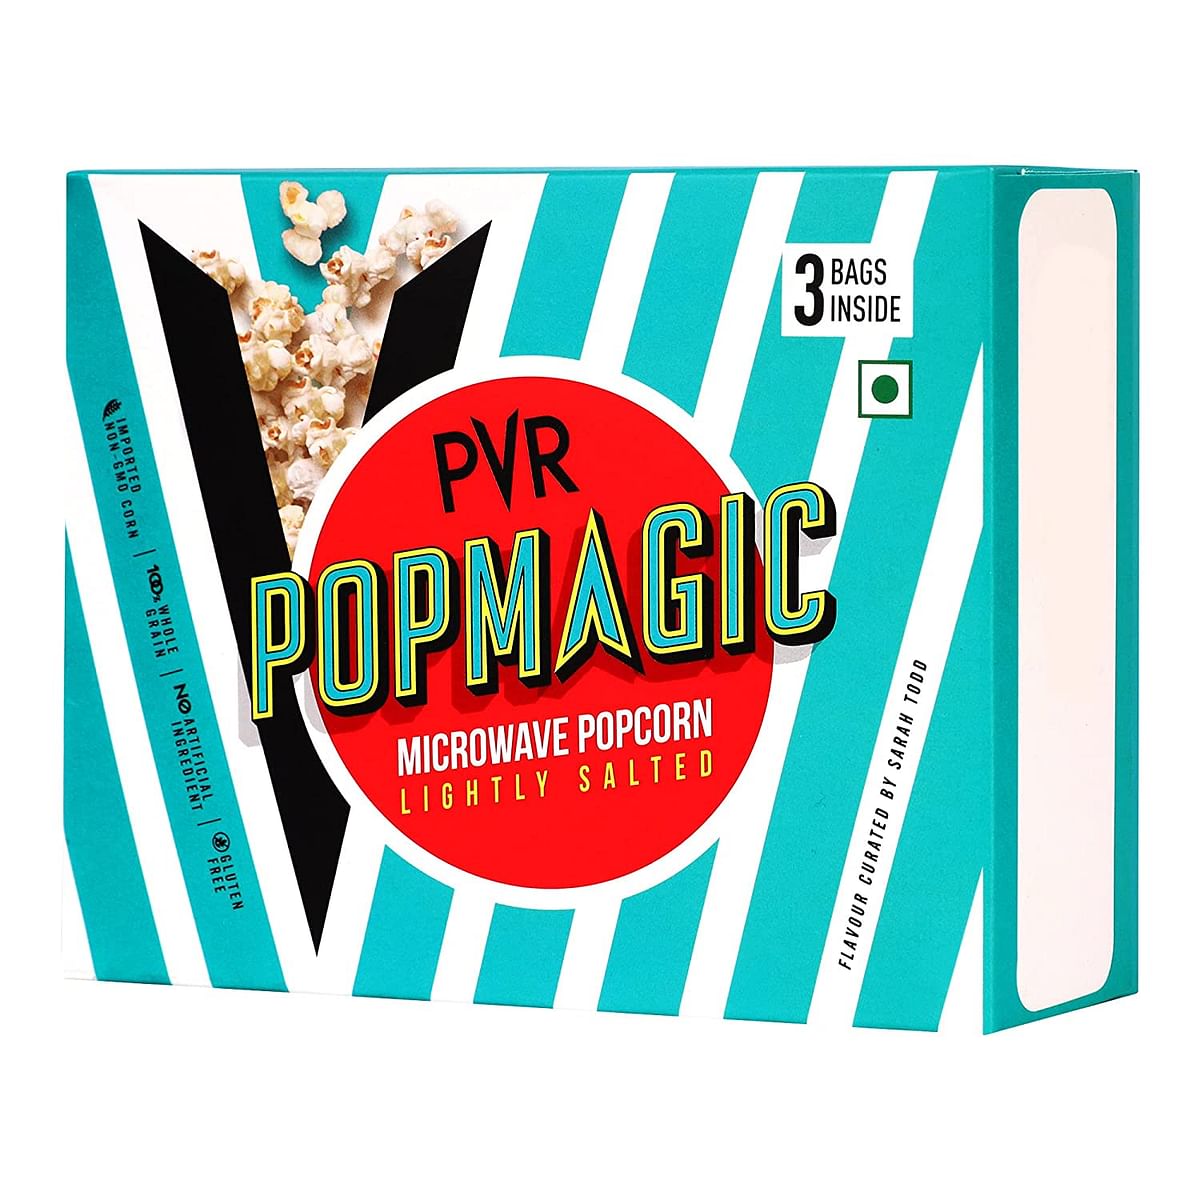 “Pushed ourselves to stay relevant”: PVR’s Gautam Dutta on
FMCG outing with microwavable popcorn